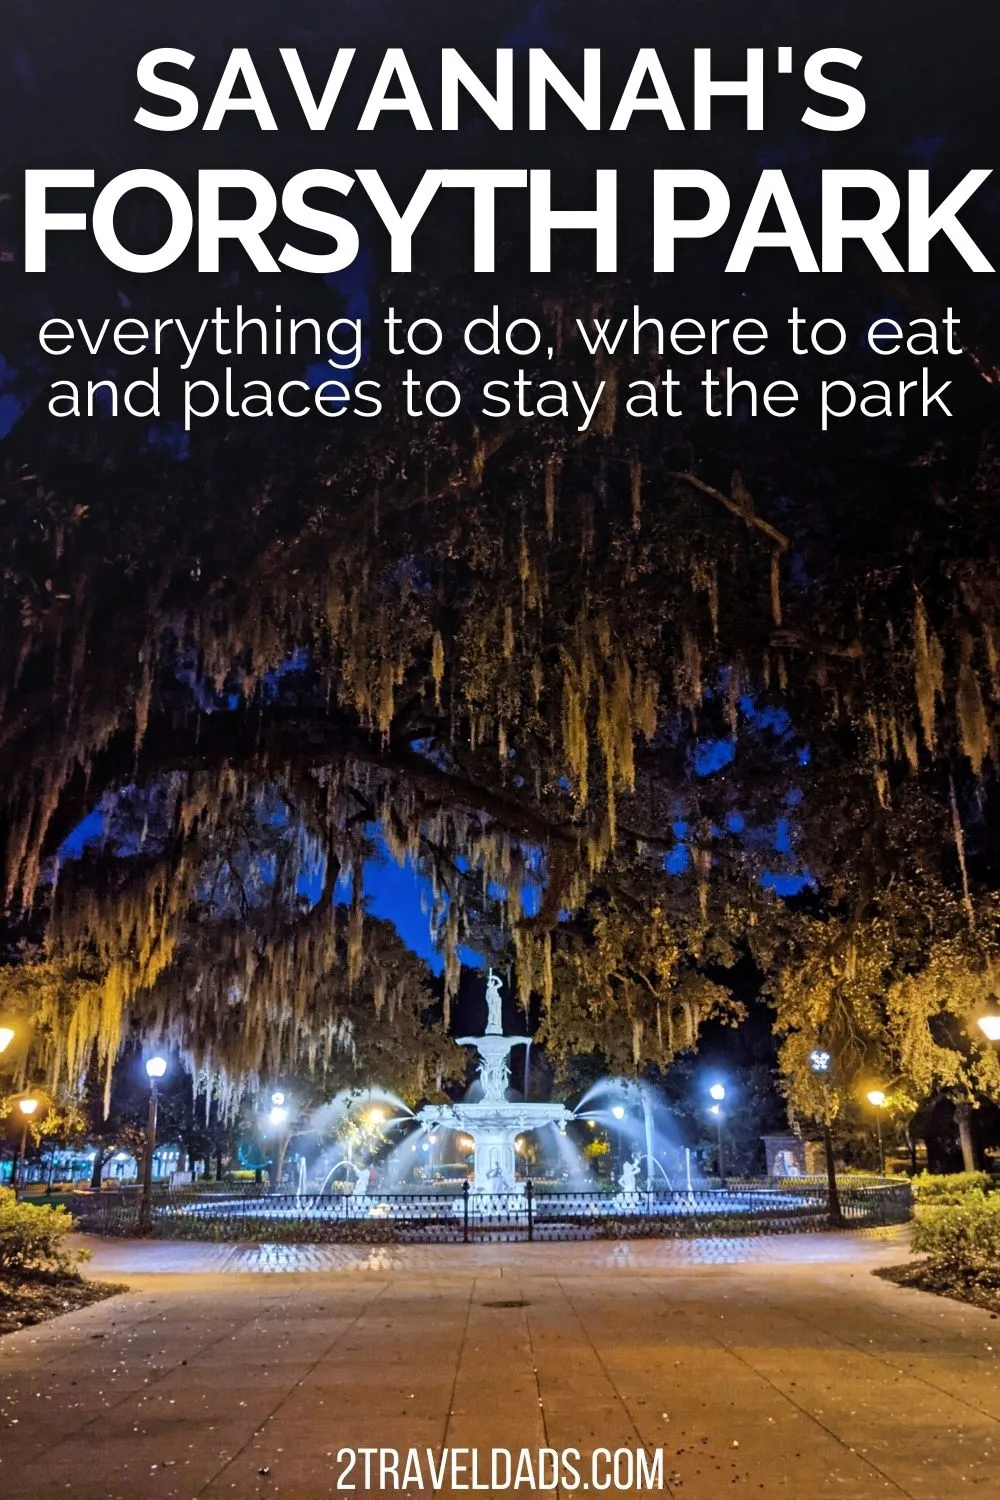 There are lots of things to do at Forsyth Park in Savannah, Georgia. From history in the park to brunch and LGBTQ events, this guide to Forsyth Park and the Victorian District of Savannah is all you need for a great visit.